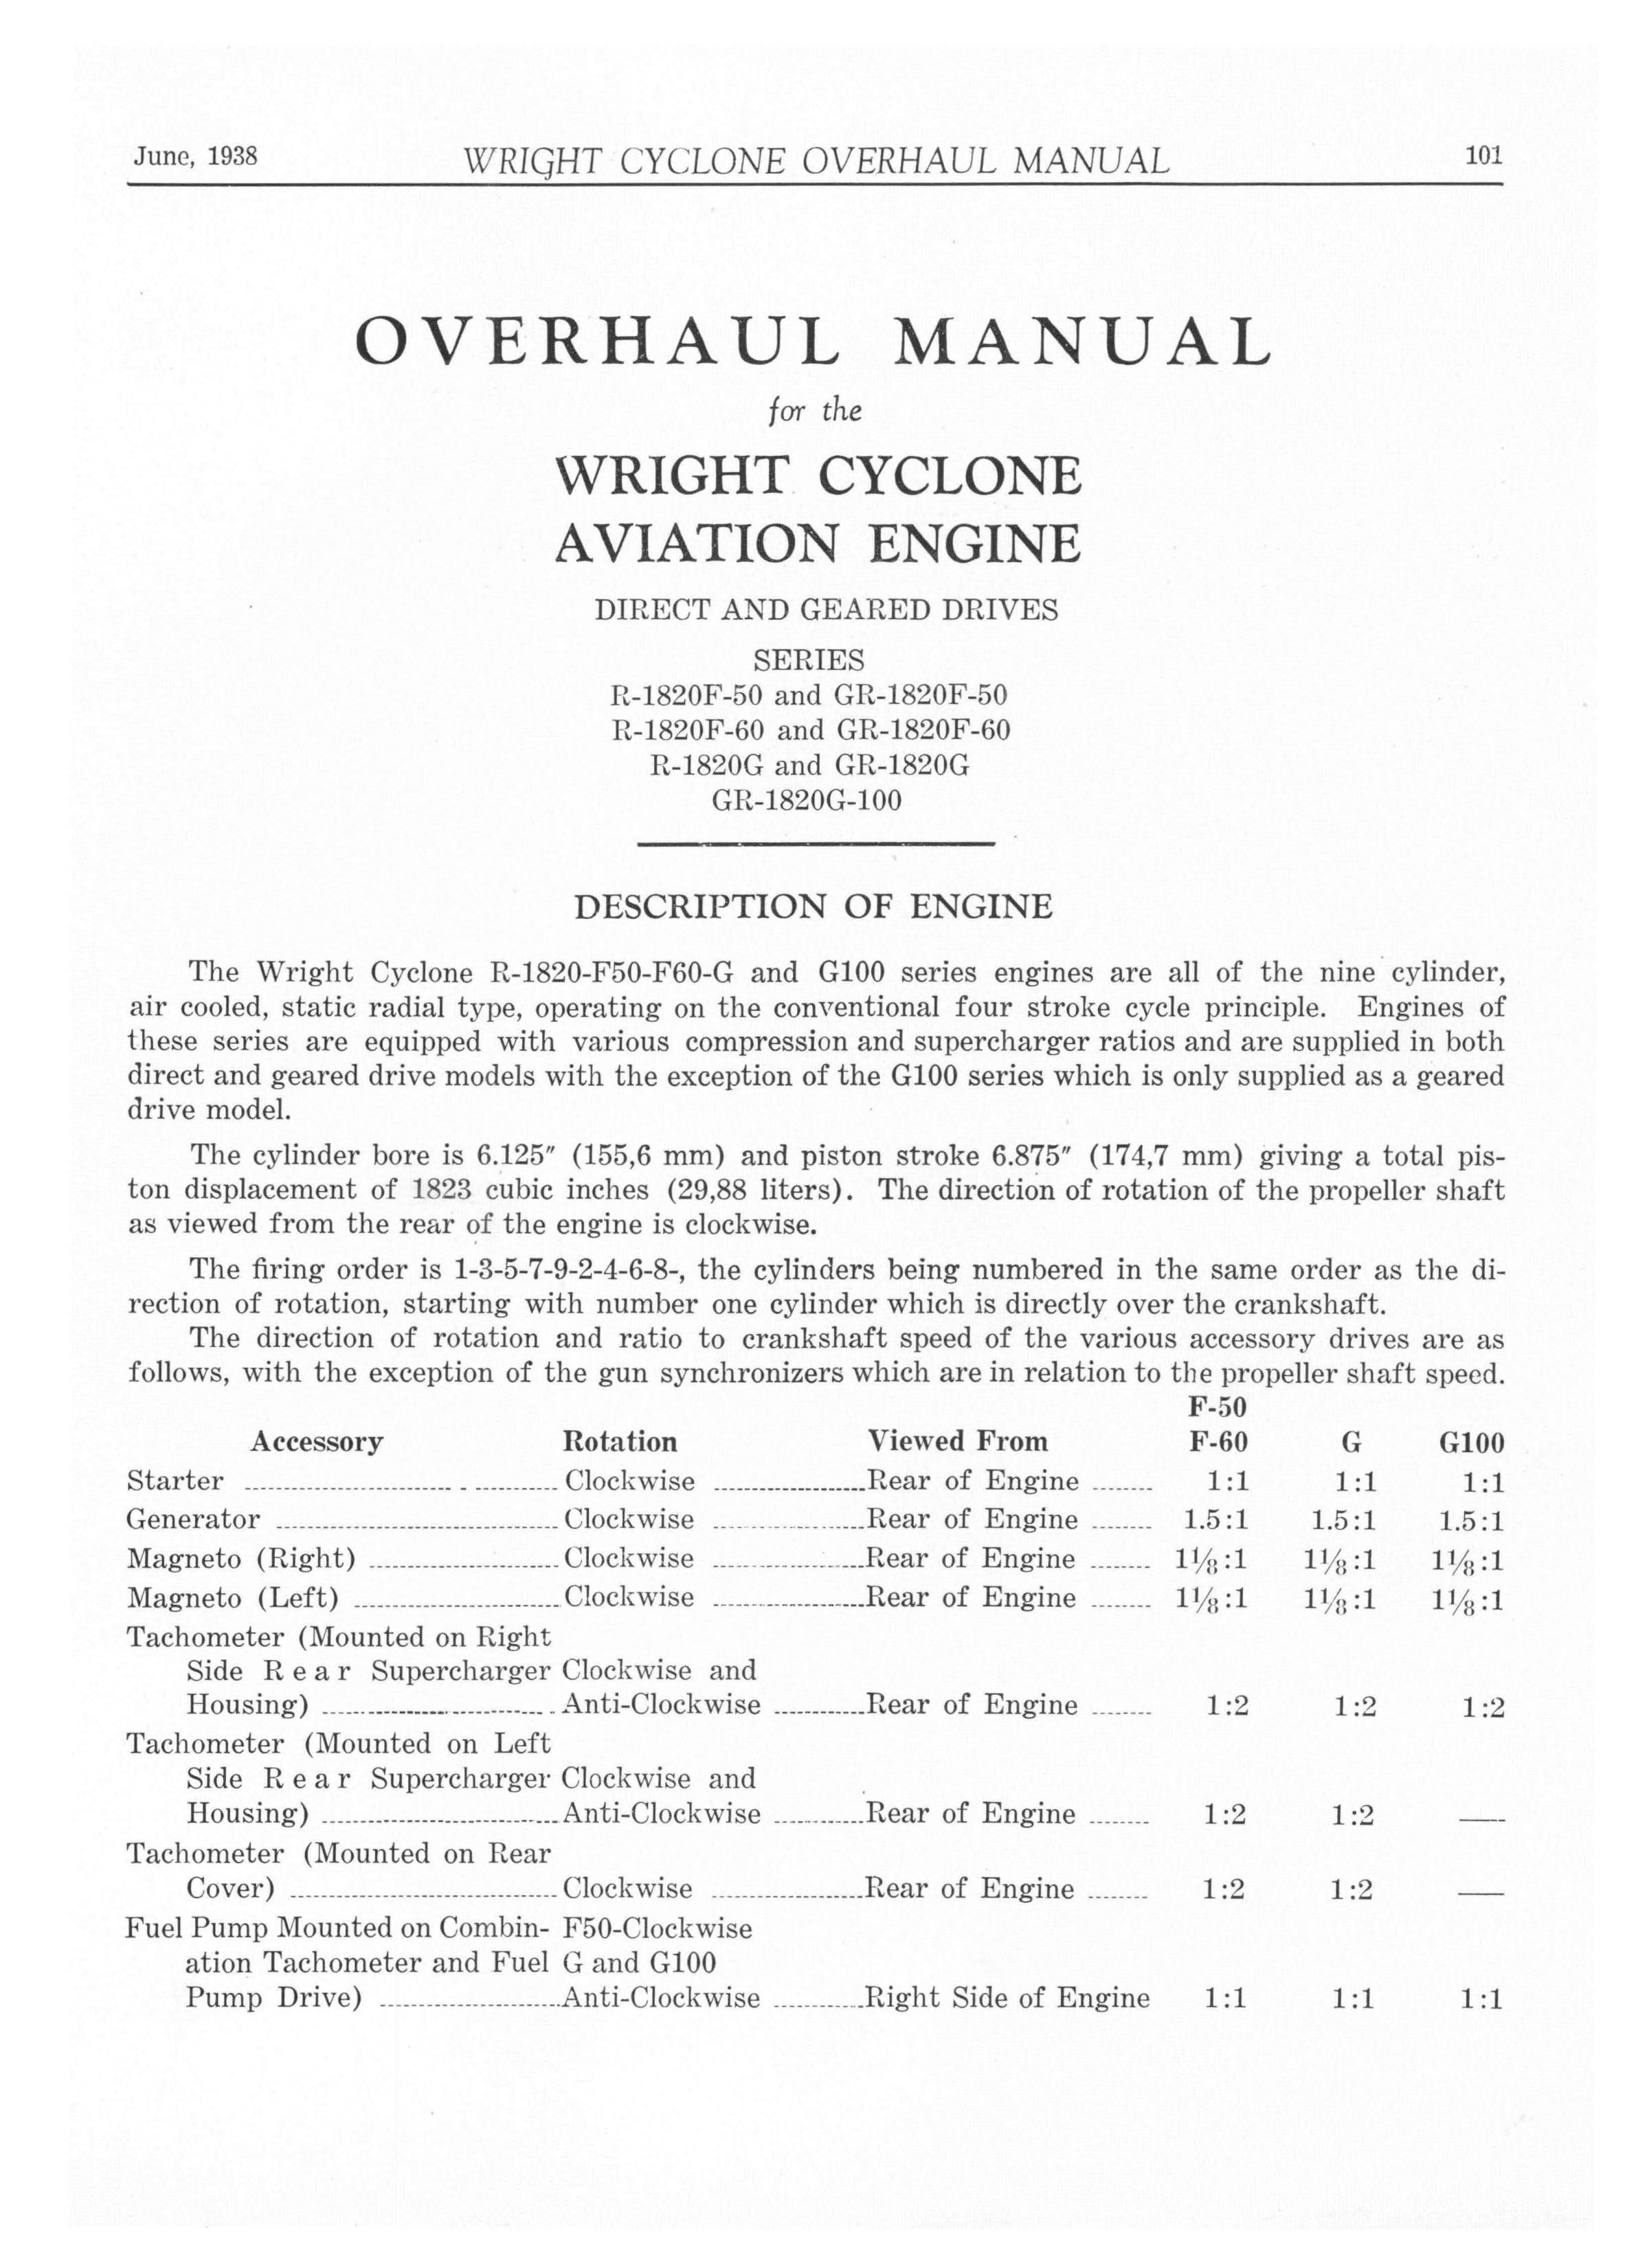 Sample page 19 from AirCorps Library document: Overhaul Manual for Wright Cyclone Engine Direct and Geared Drives